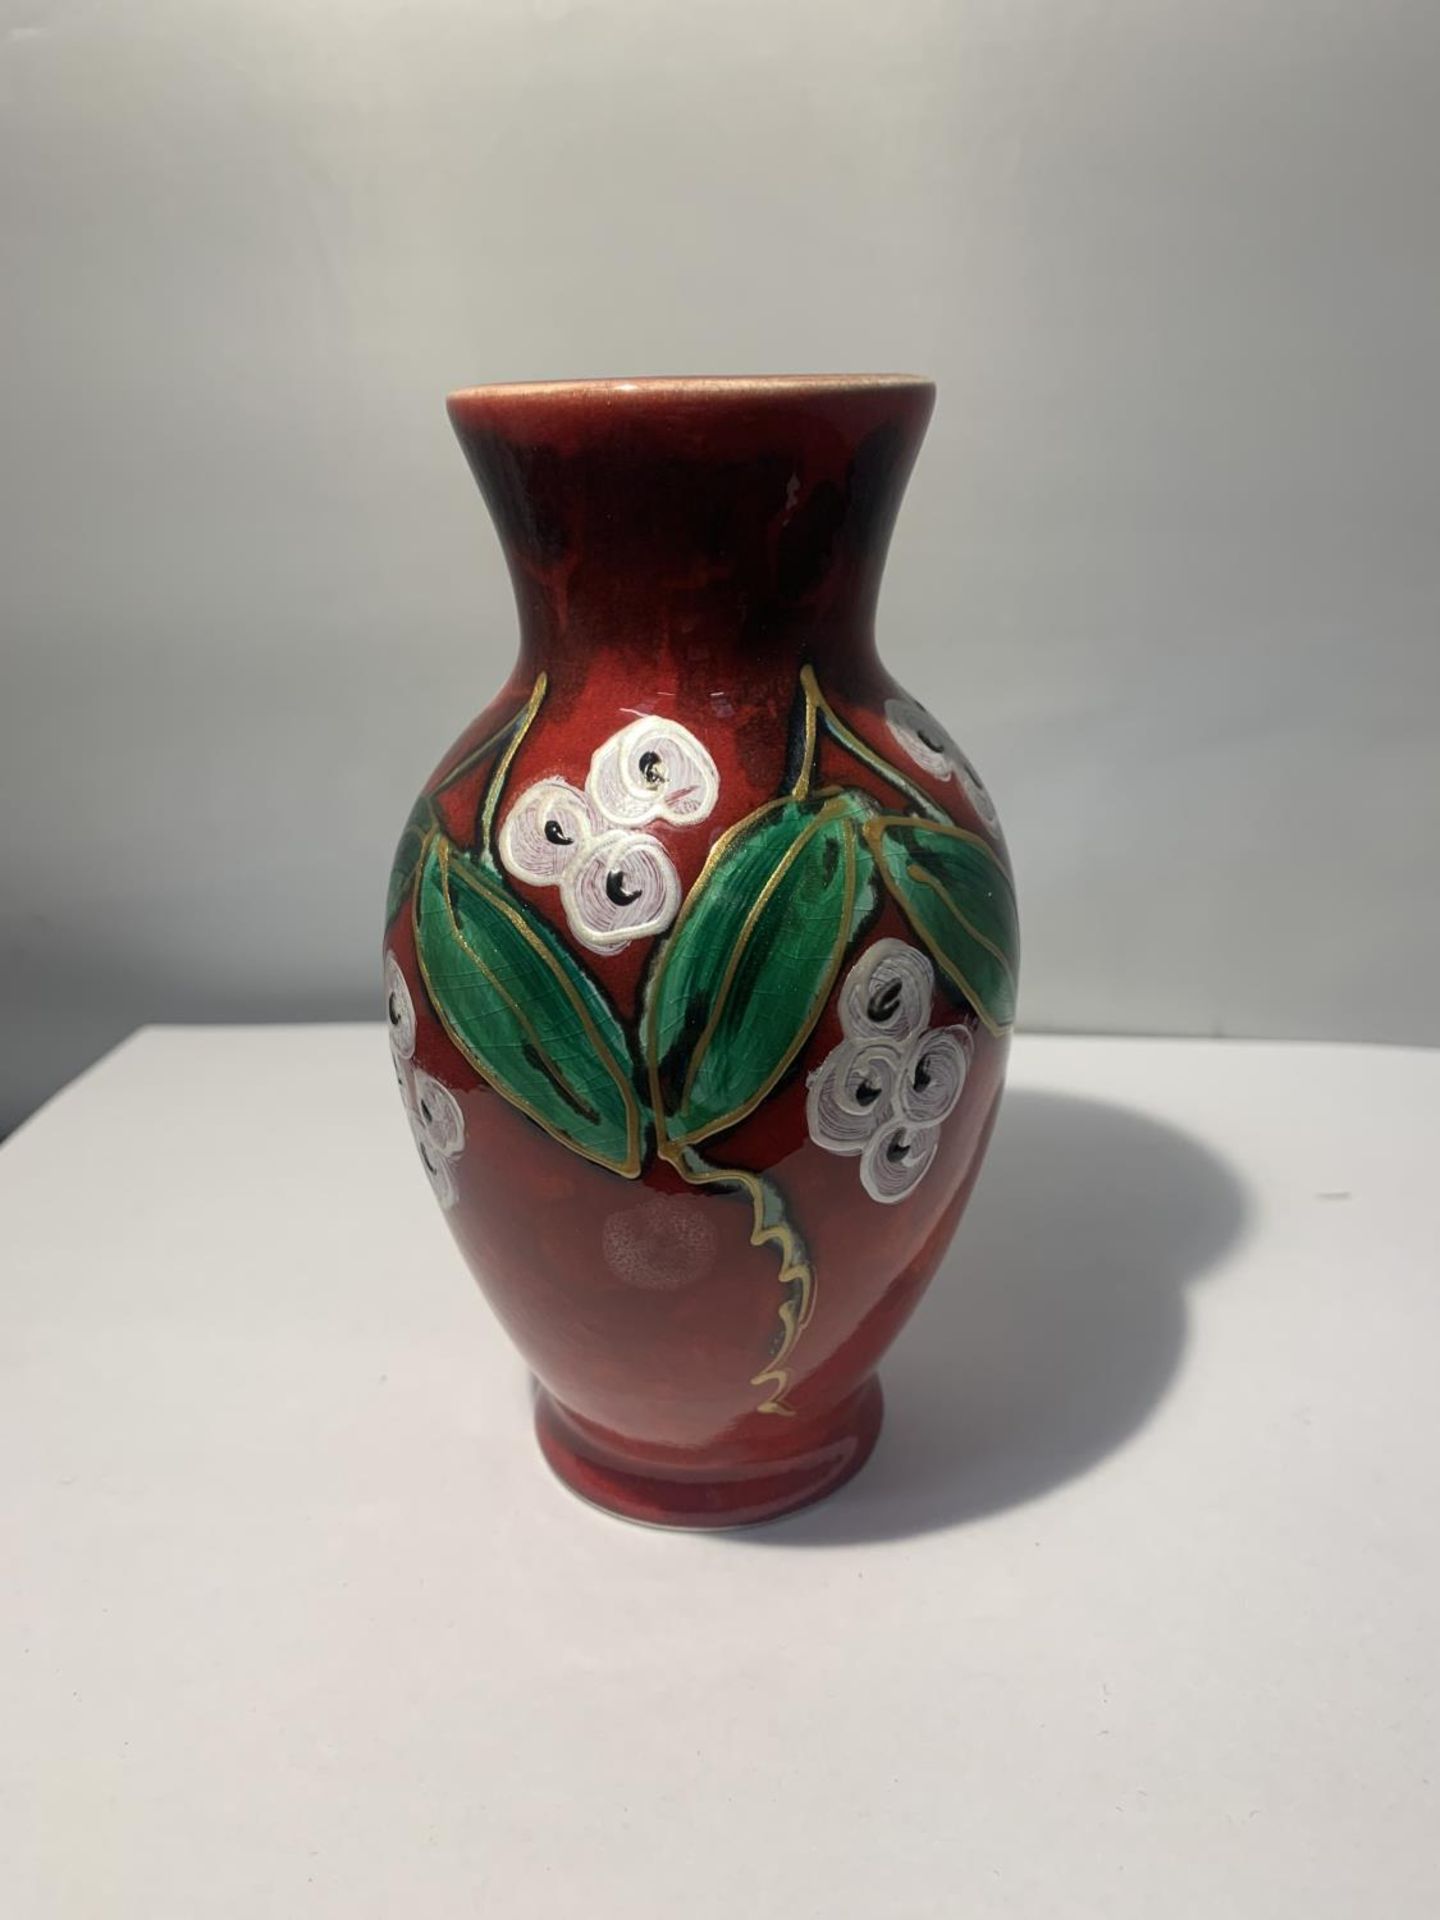 AN ANITA HARRIS WHITE BERRIES VASE HANDPAINTED AND SIGNED IN GOLD